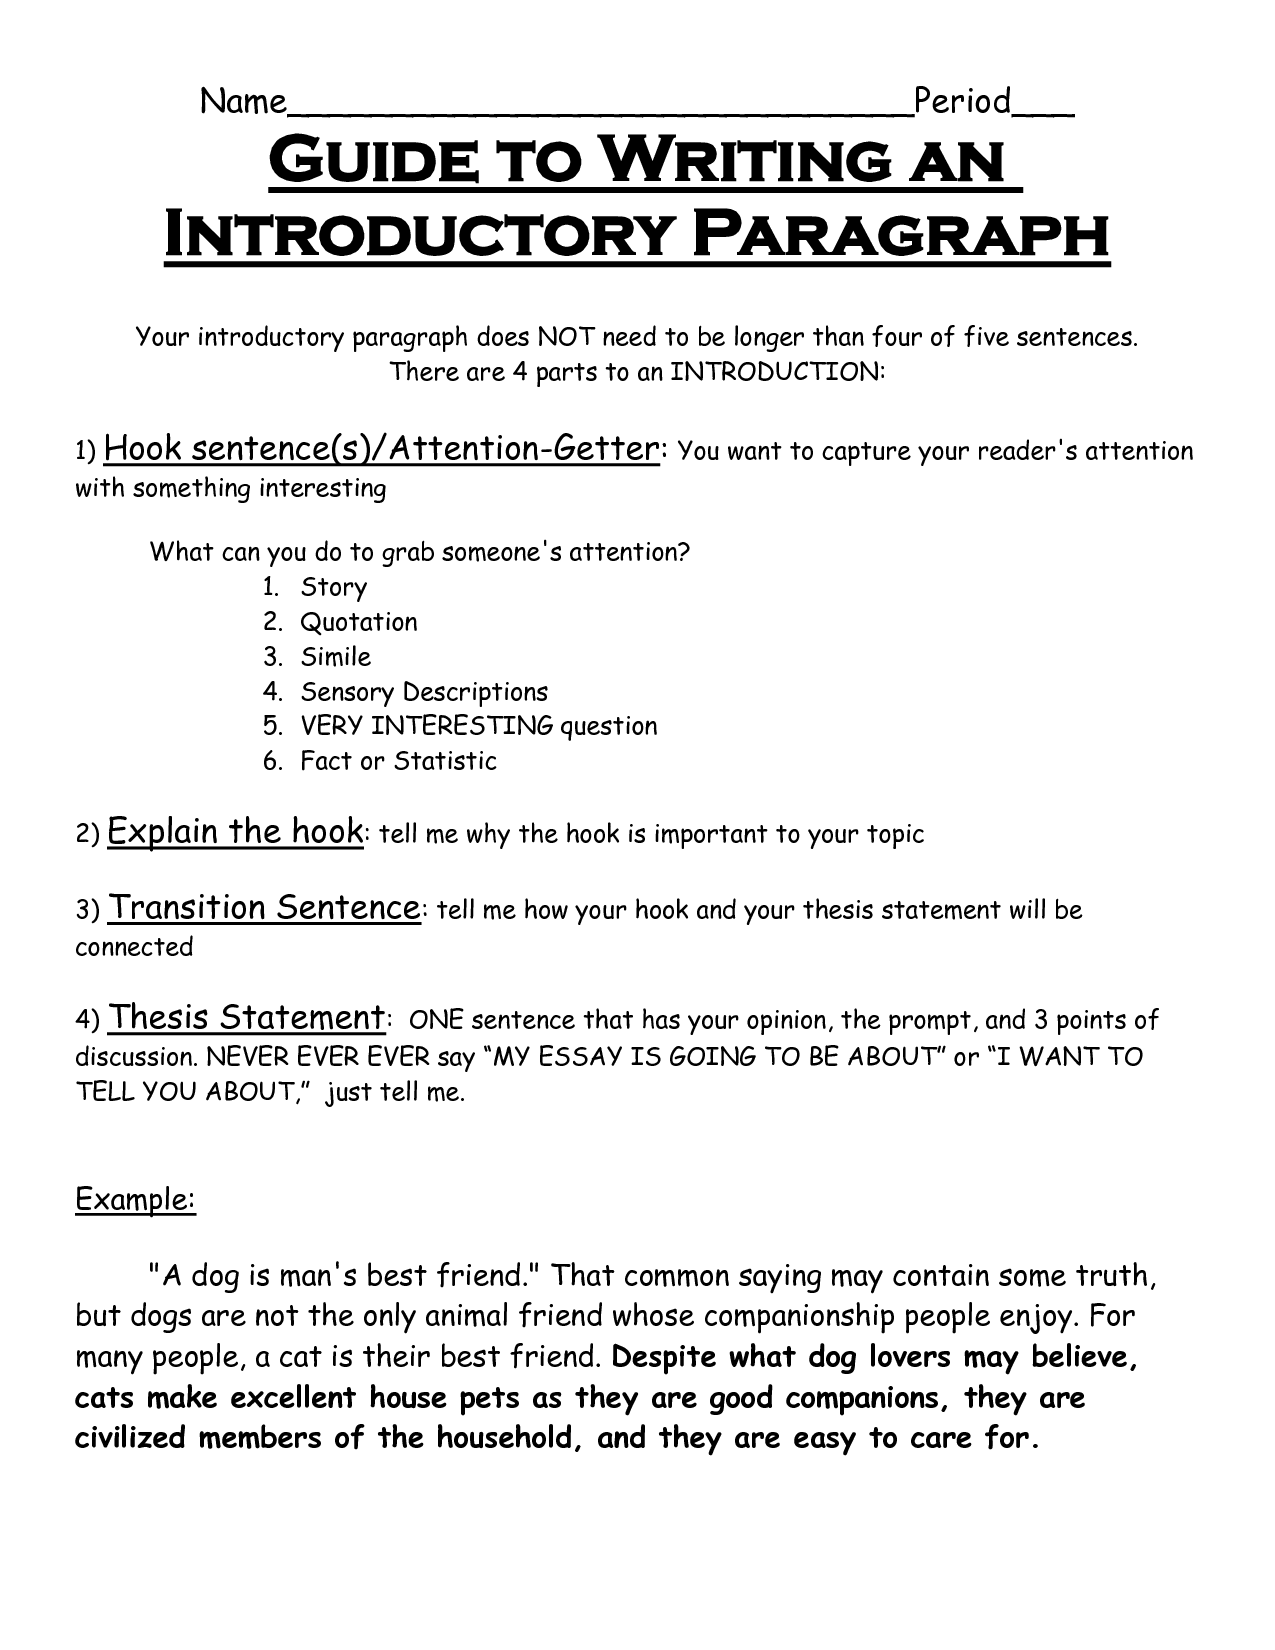 Introductory paragraph essay